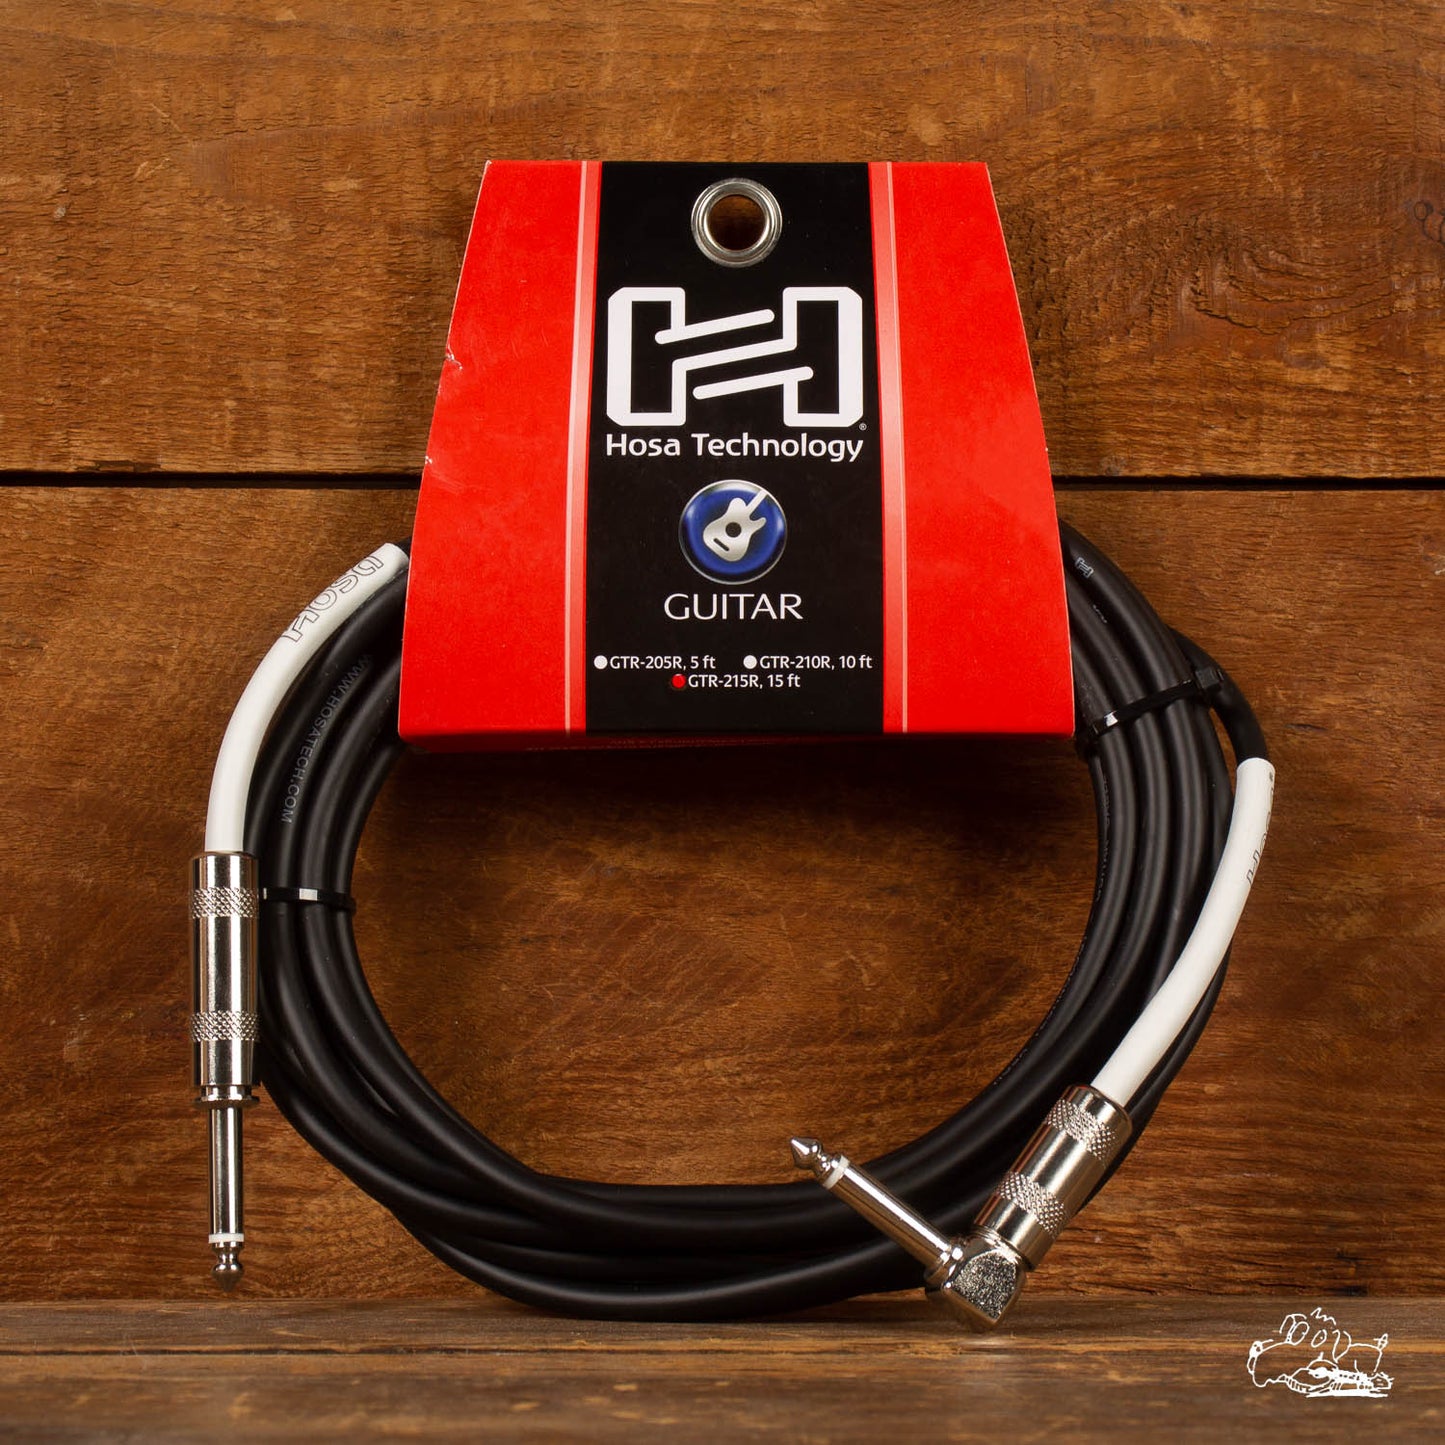 Hosa 15' Guitar Cable - Straight to Right Angle - 24 AWG